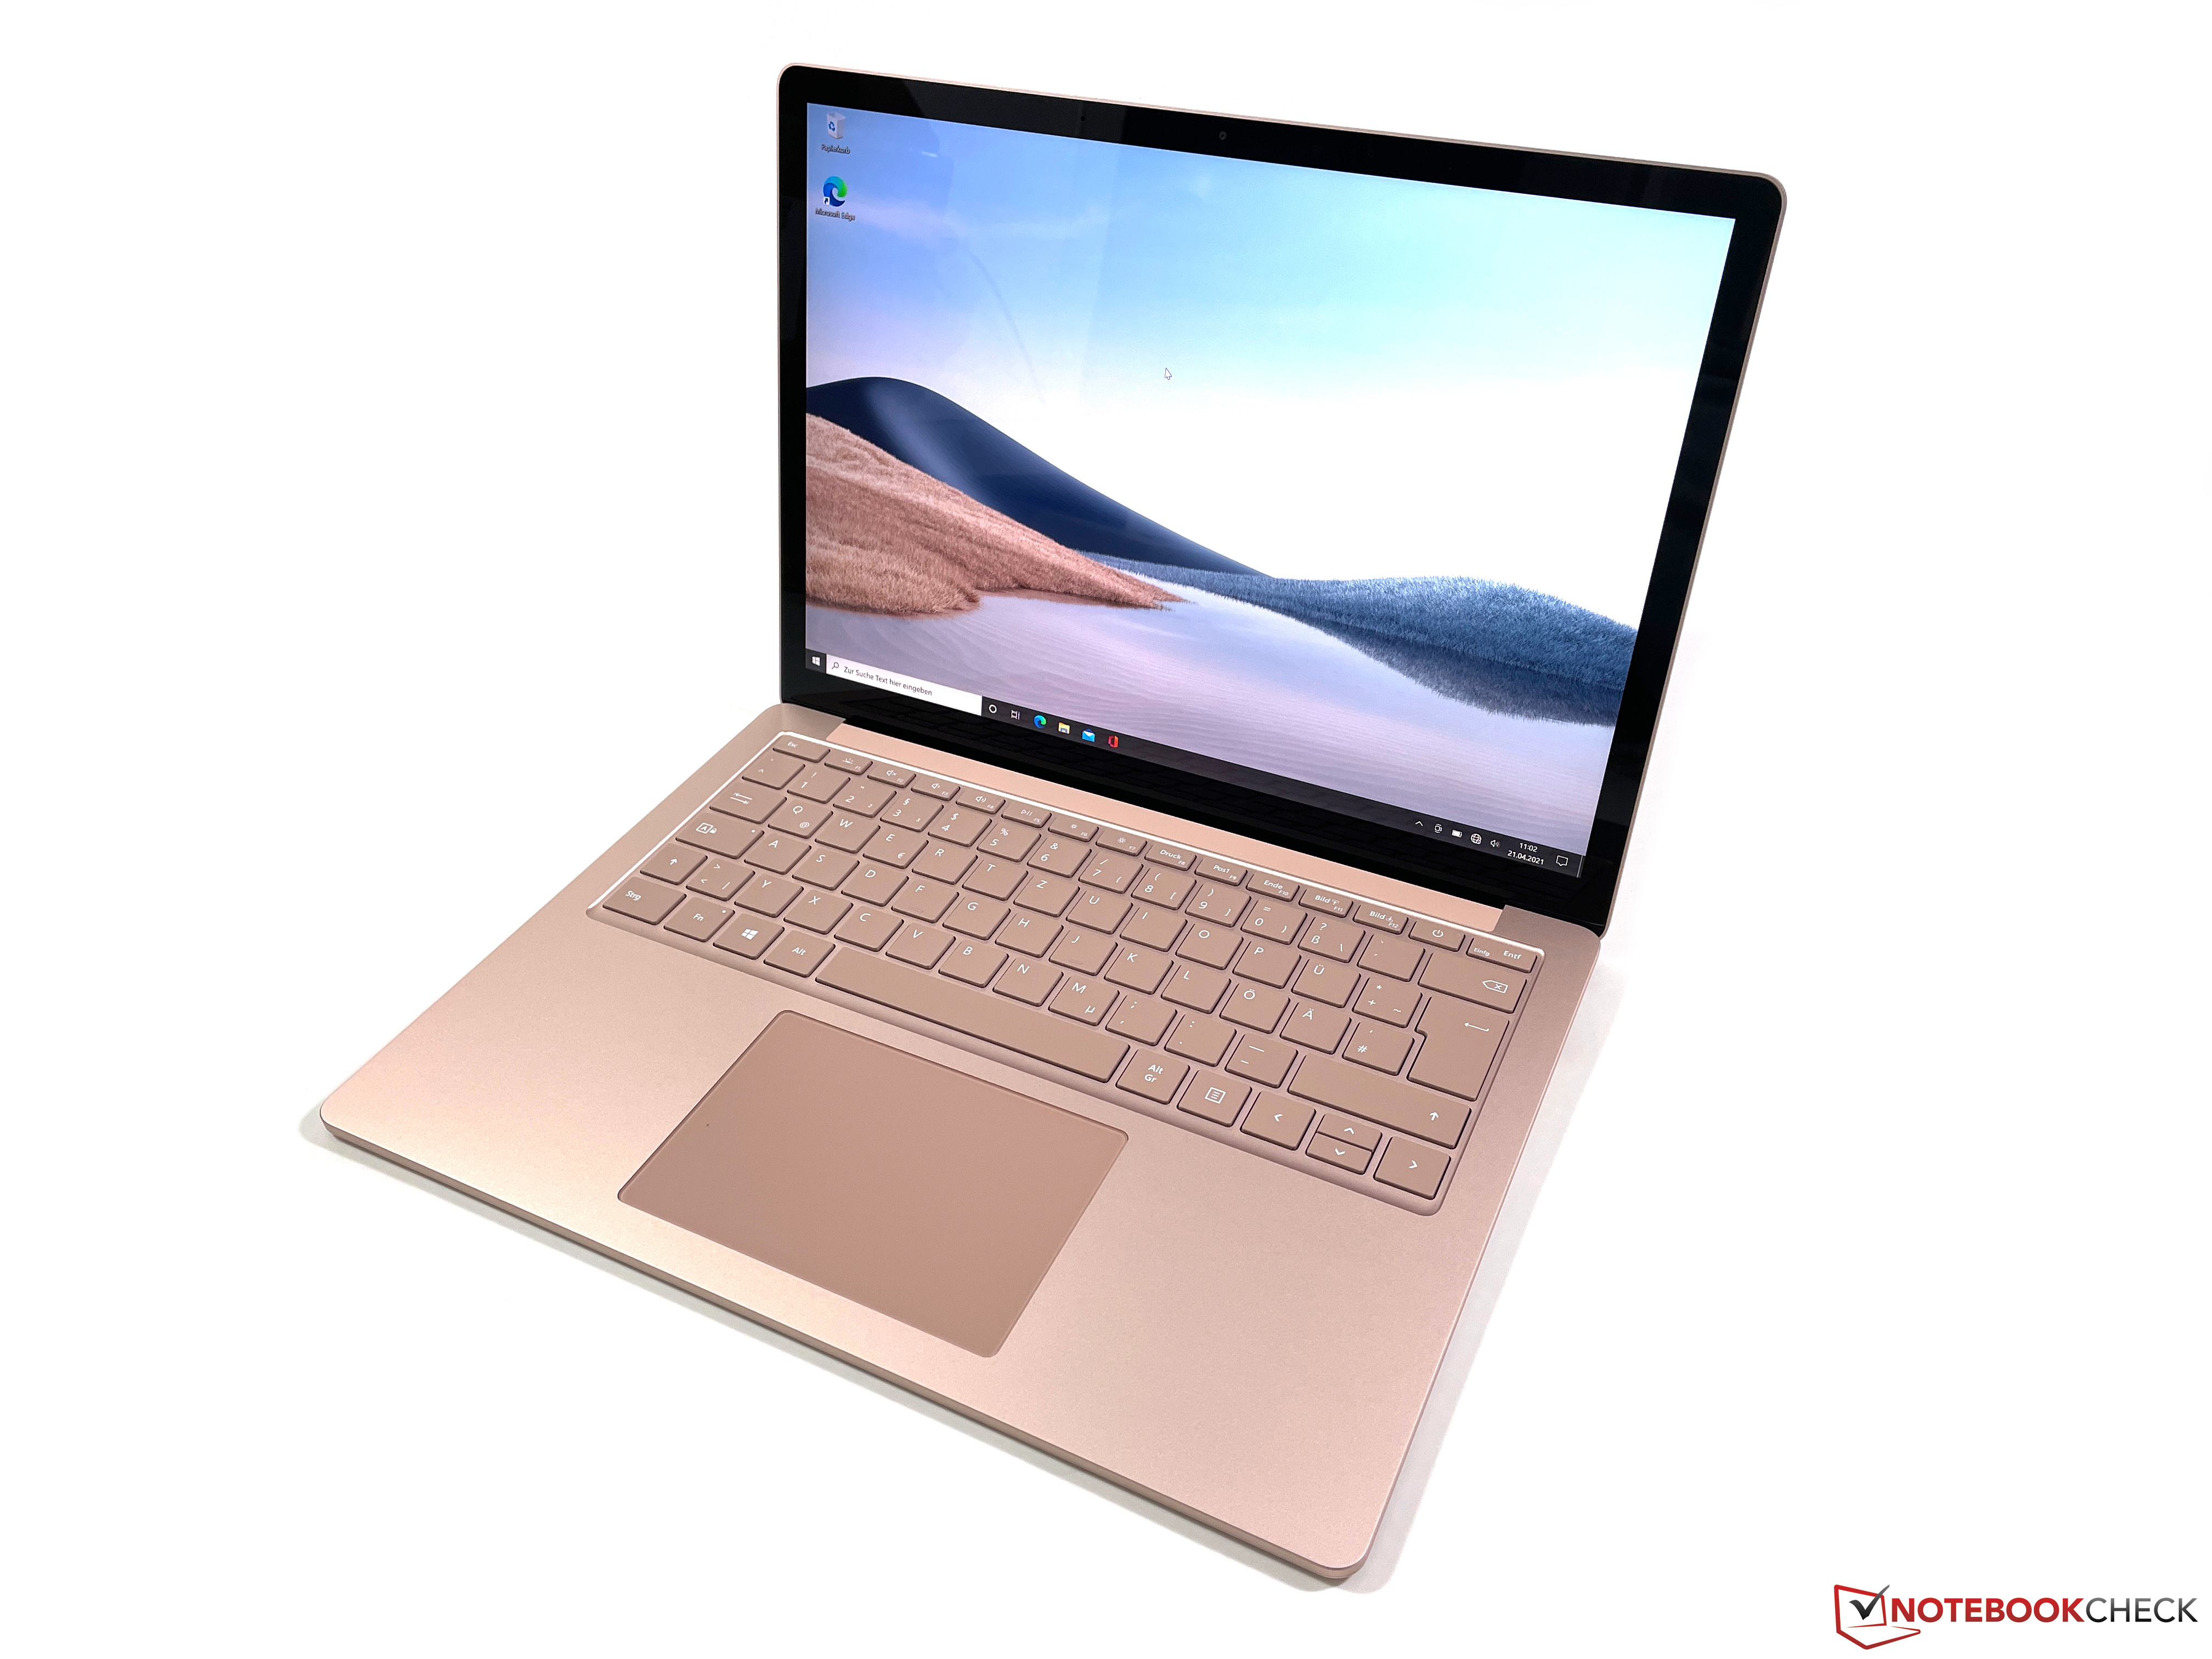 Microsoft Surface Laptop with Intel Too - - 13 4 Reviews expensive Review NotebookCheck.net CPU? Laptop